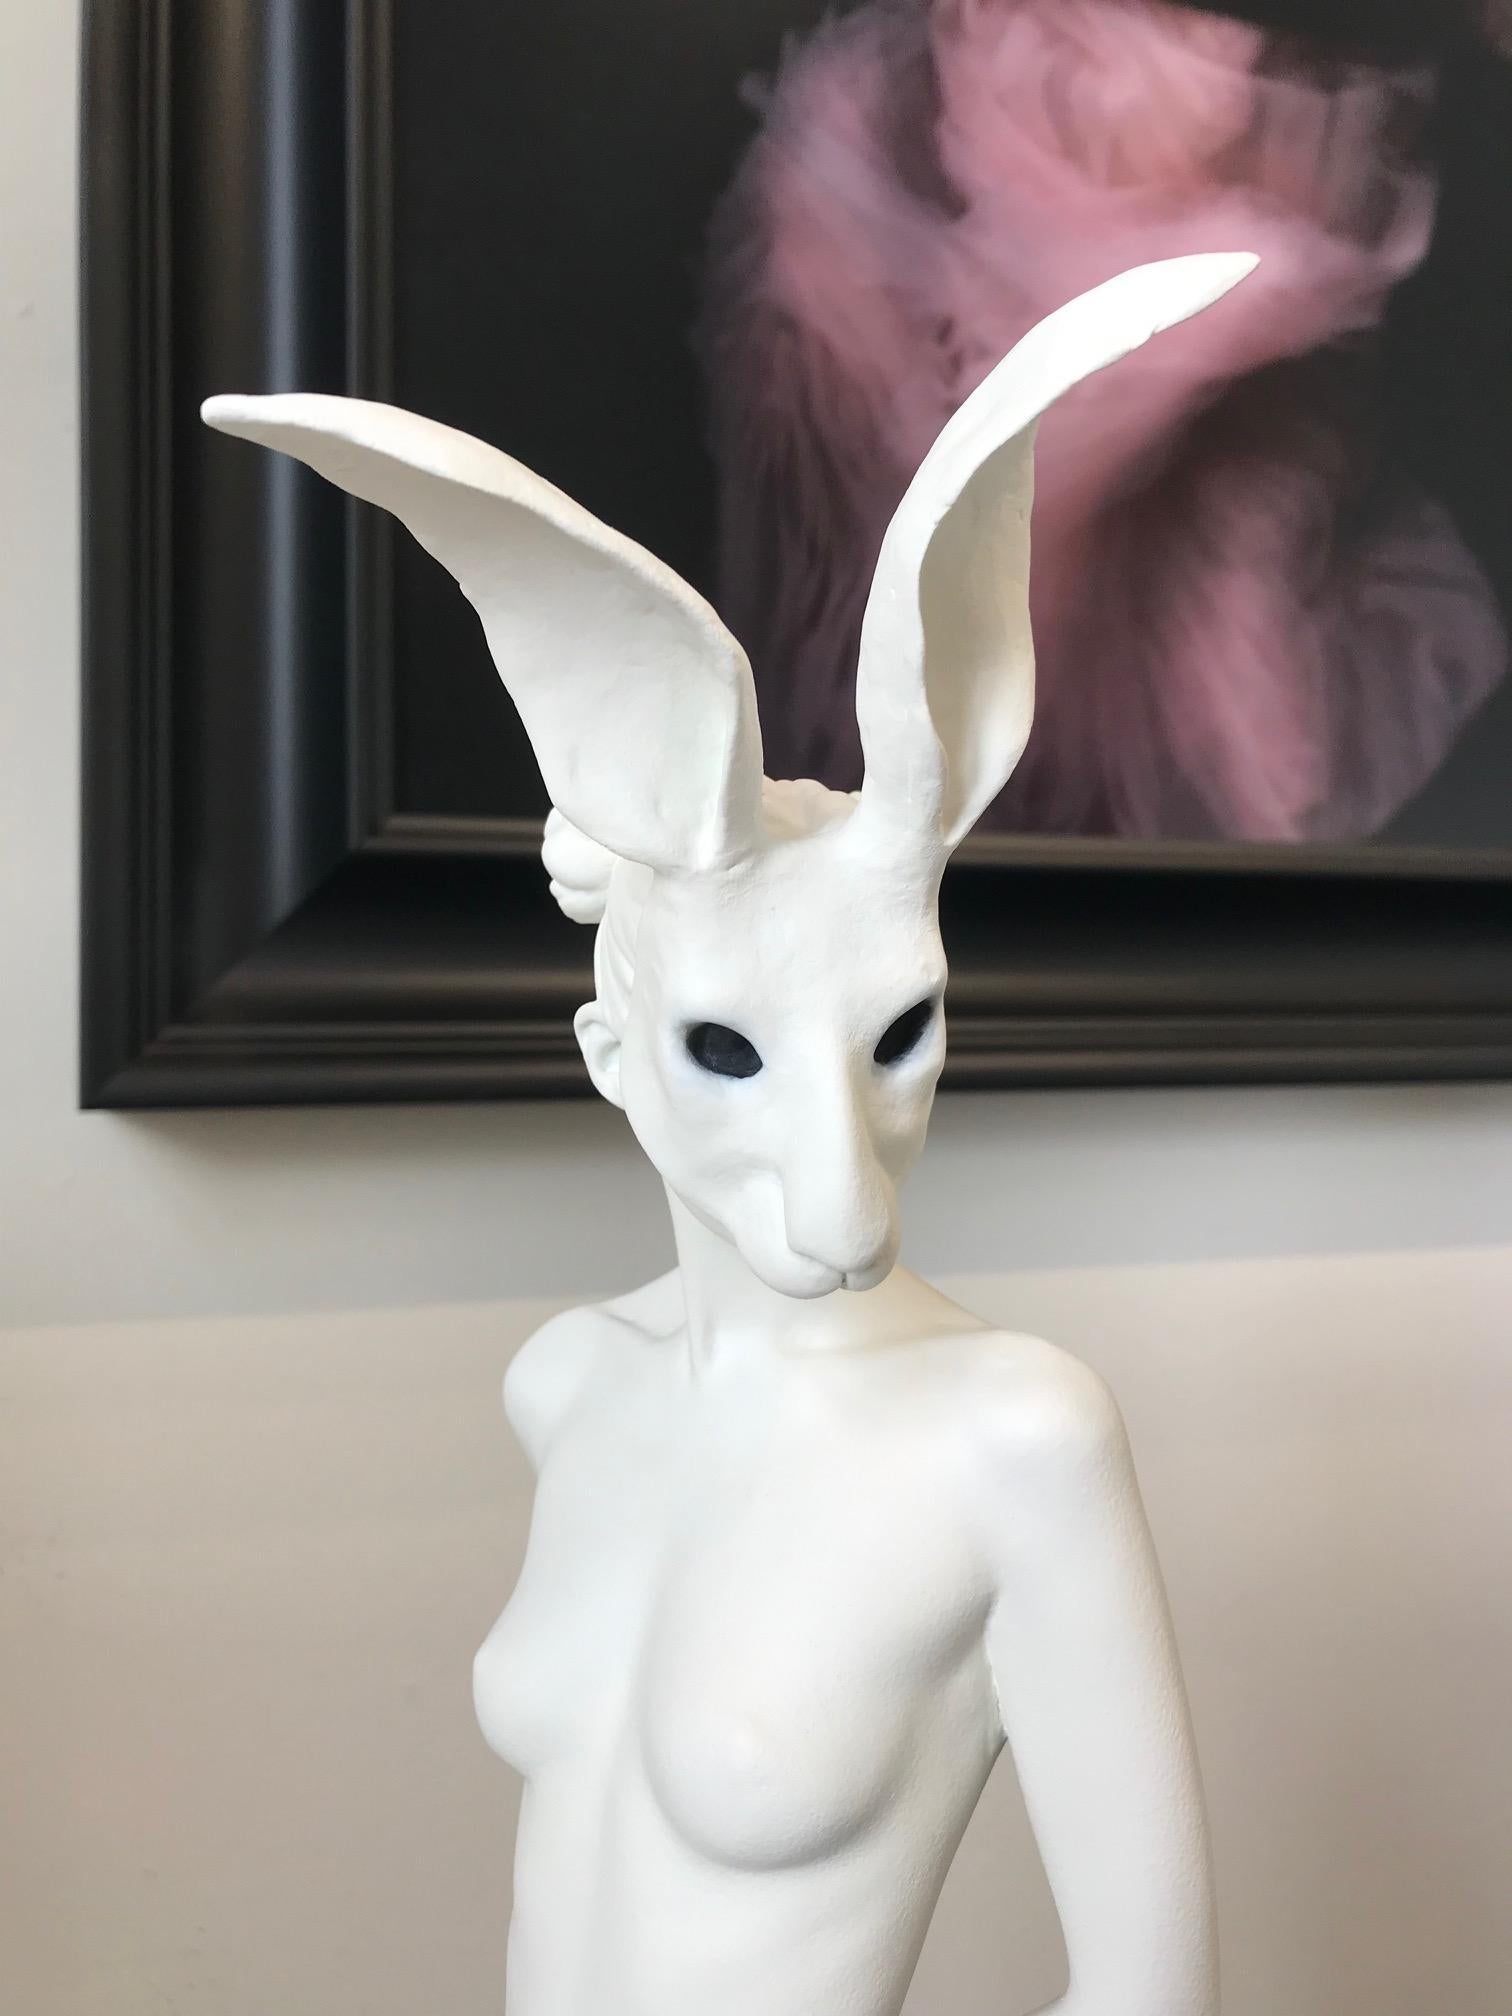 The mysterious artworks by Rachel Ann Stevenson invite you into a dream world. Rachel Ann sees artists as day dreamers who can show the impossible to the world. Her sculptures resemble human beings, but at the same time they are not from this world.